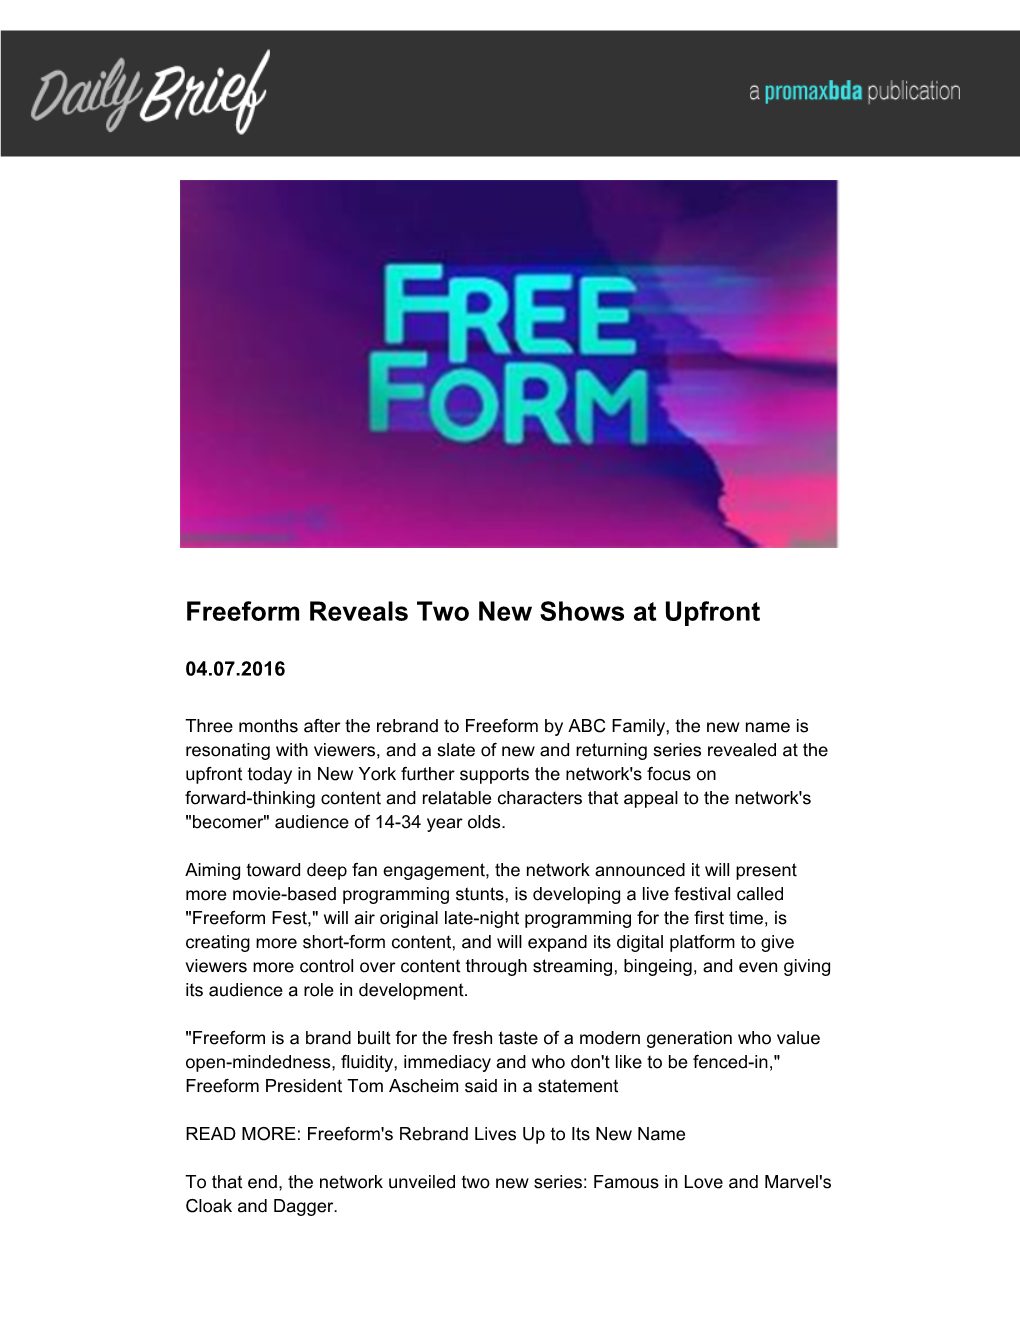 Freeform Reveals Two New Shows at Upfront